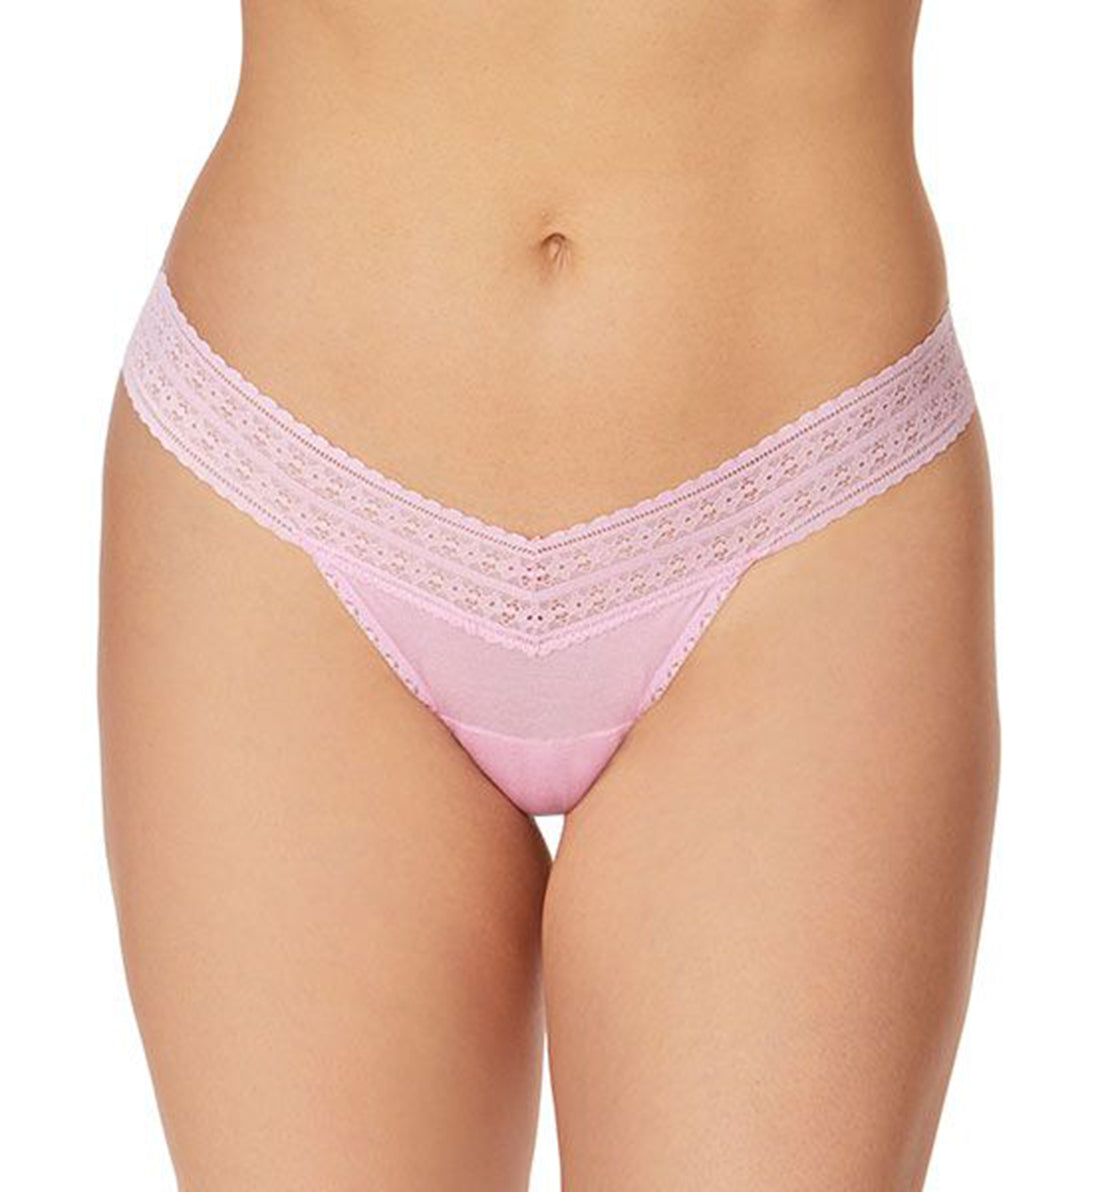 Hanky Panky DreamEase Low Rise Thong (631004),Cotton Candy Pink - Cotton Candy Pink,One Size